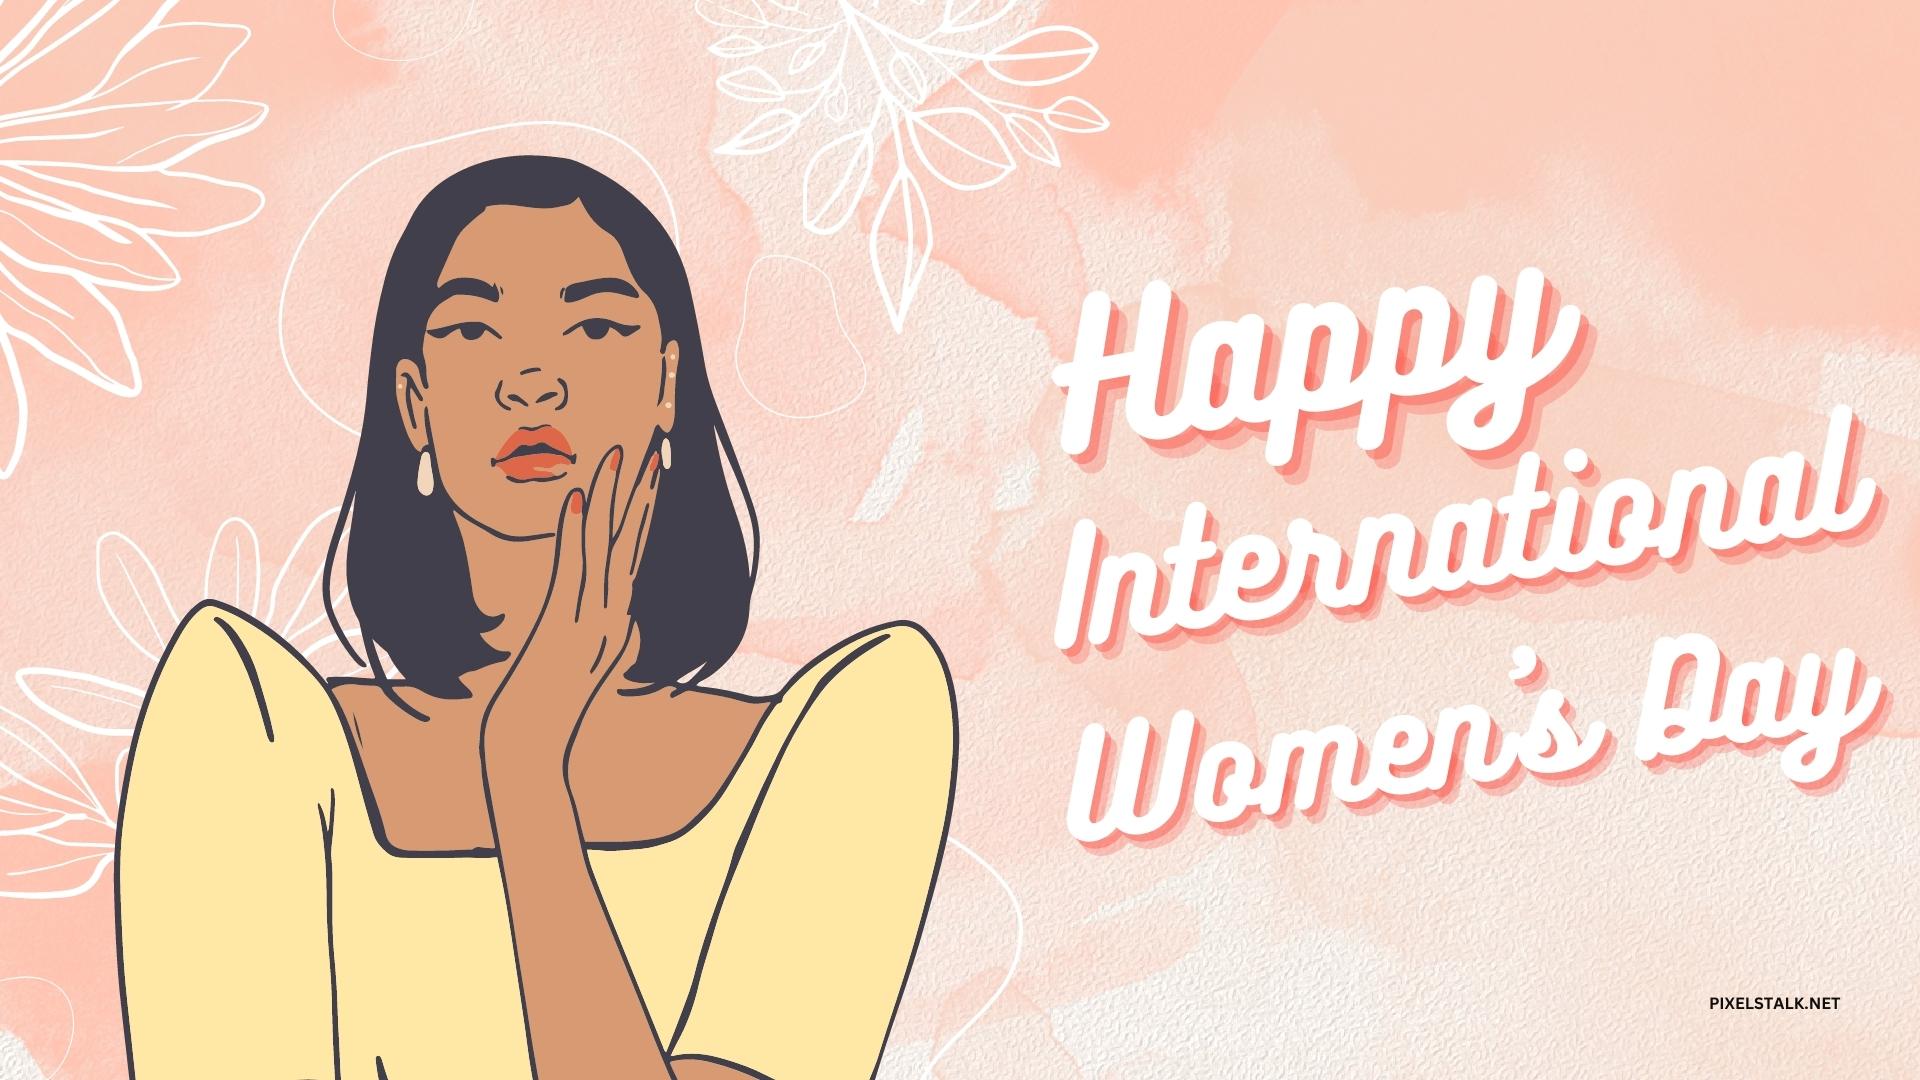 Womens Day Wallpaper Free Download.